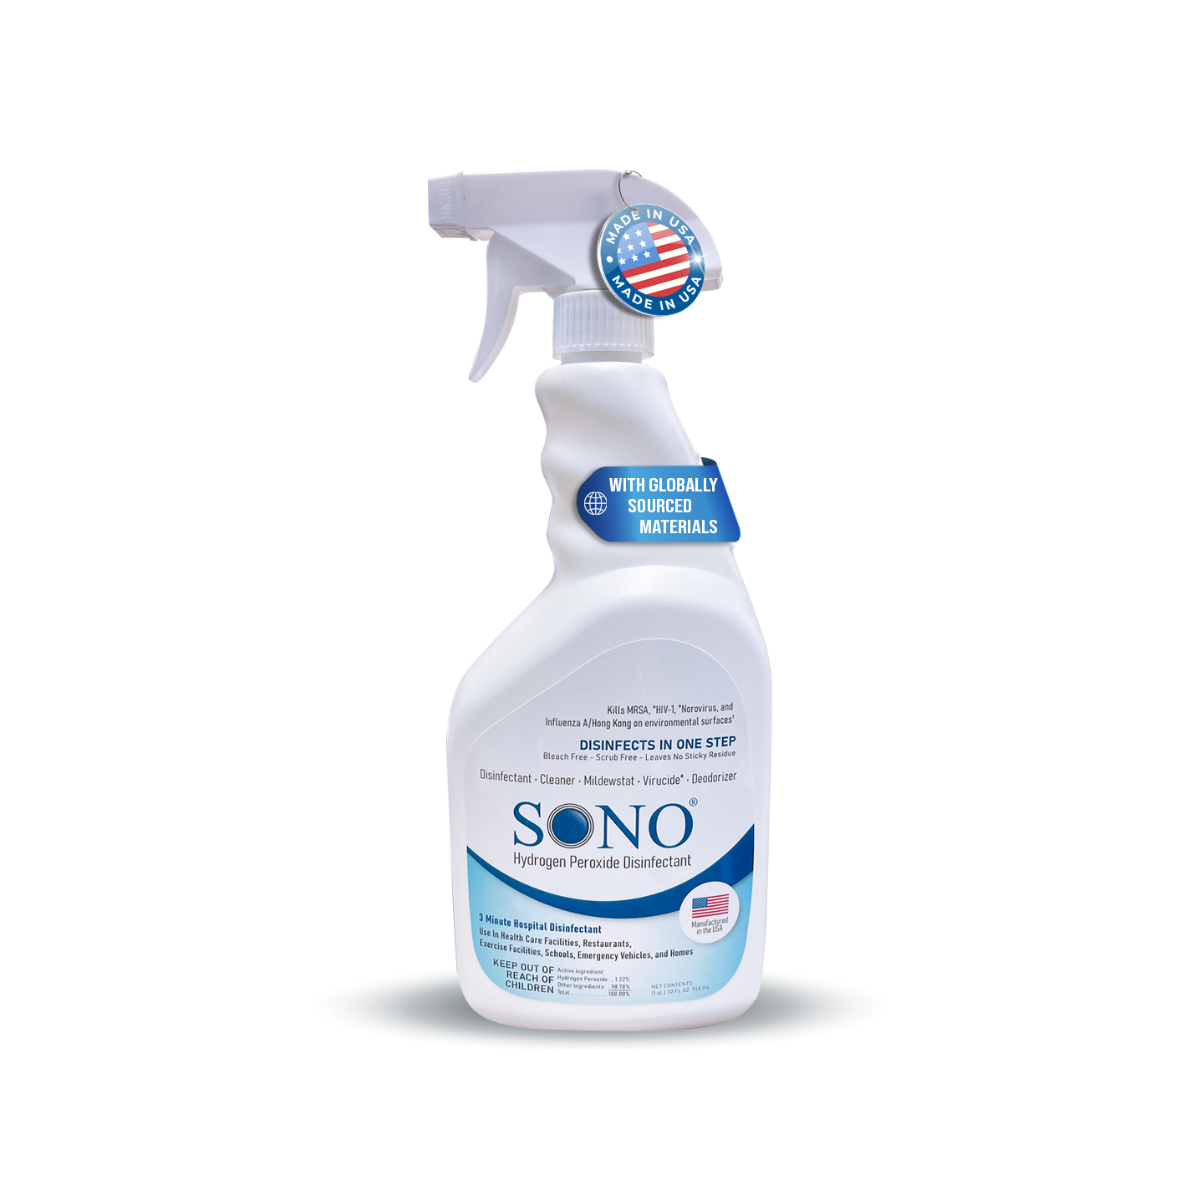 SONO Disinfecting Spray and Stain Remover (3 PACK)